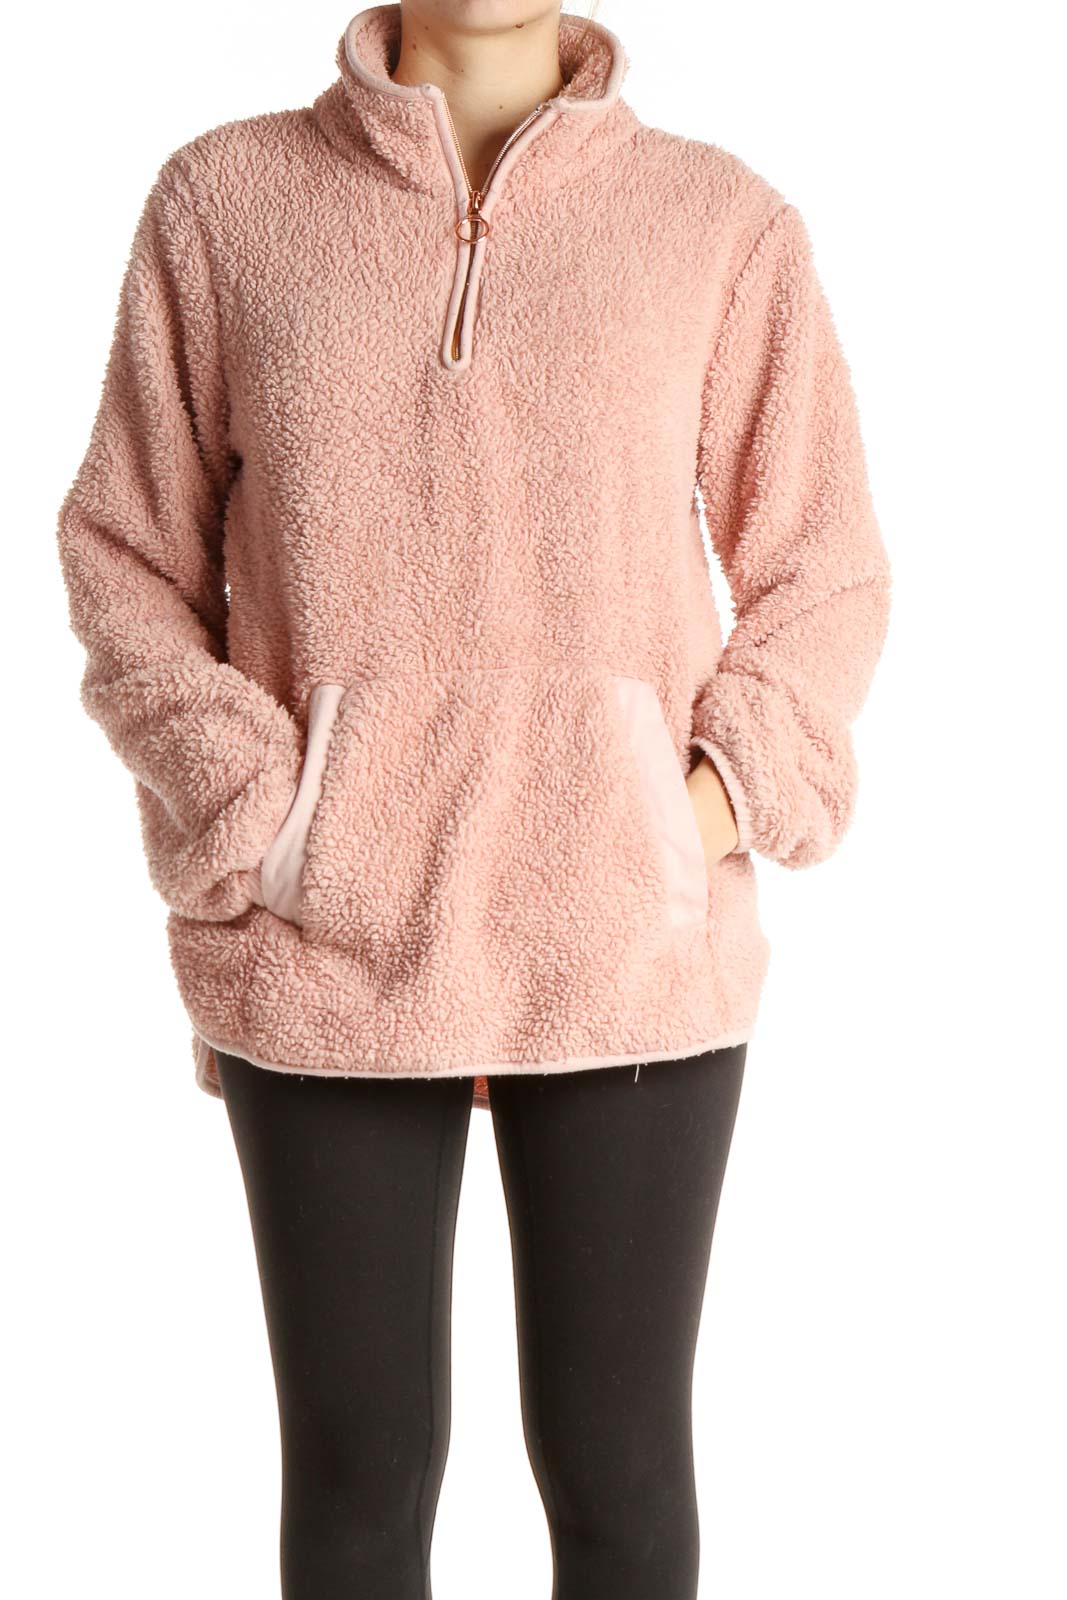 Pink Sherpa All Day Wear Sweater Front